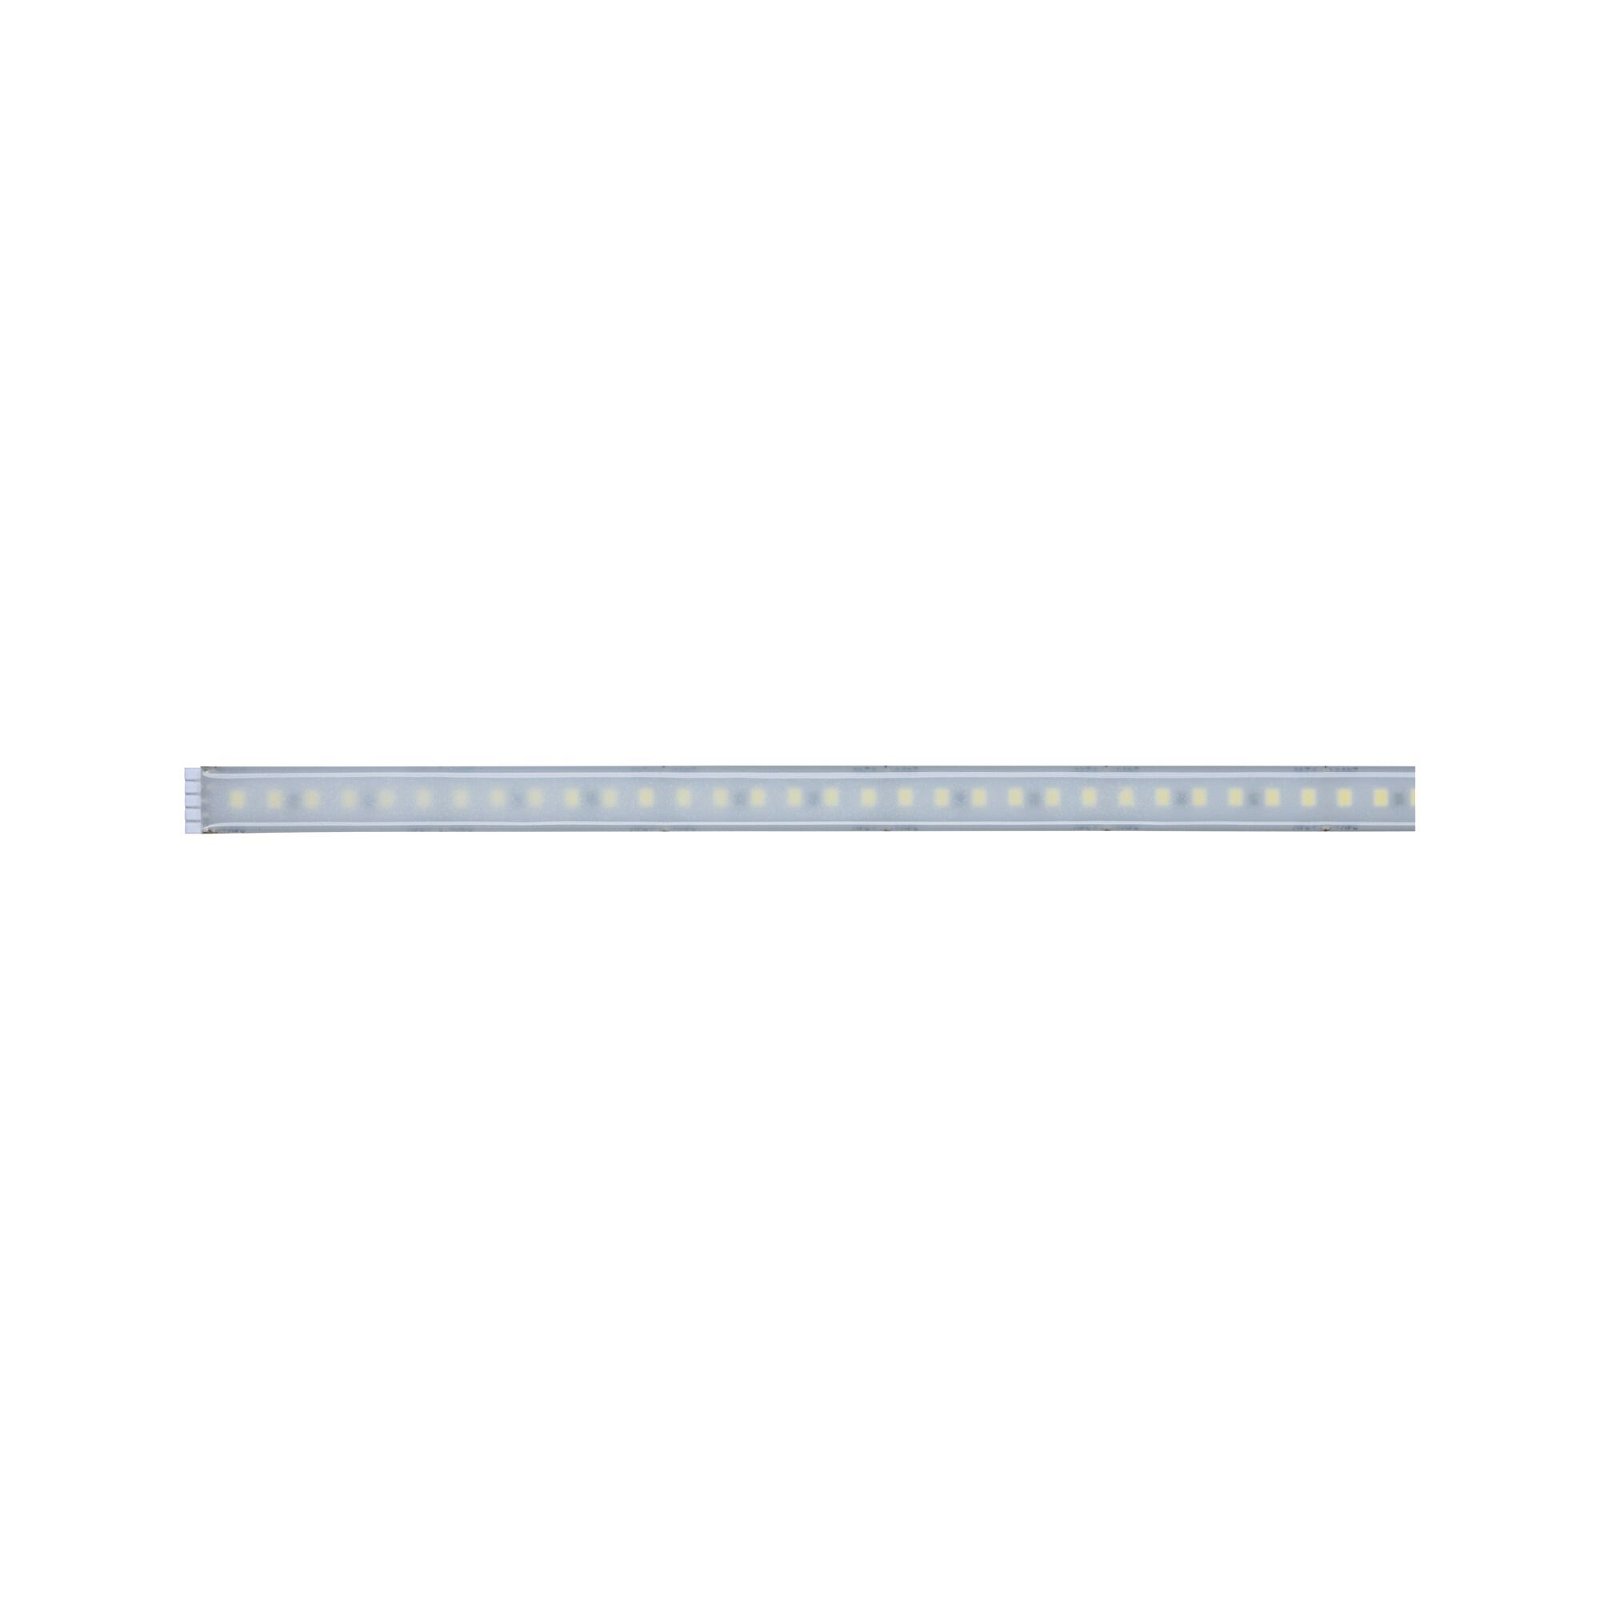 MaxLED 1000 LED Strip Daylight white 1m protect cover 12W 880lm/m 6500K